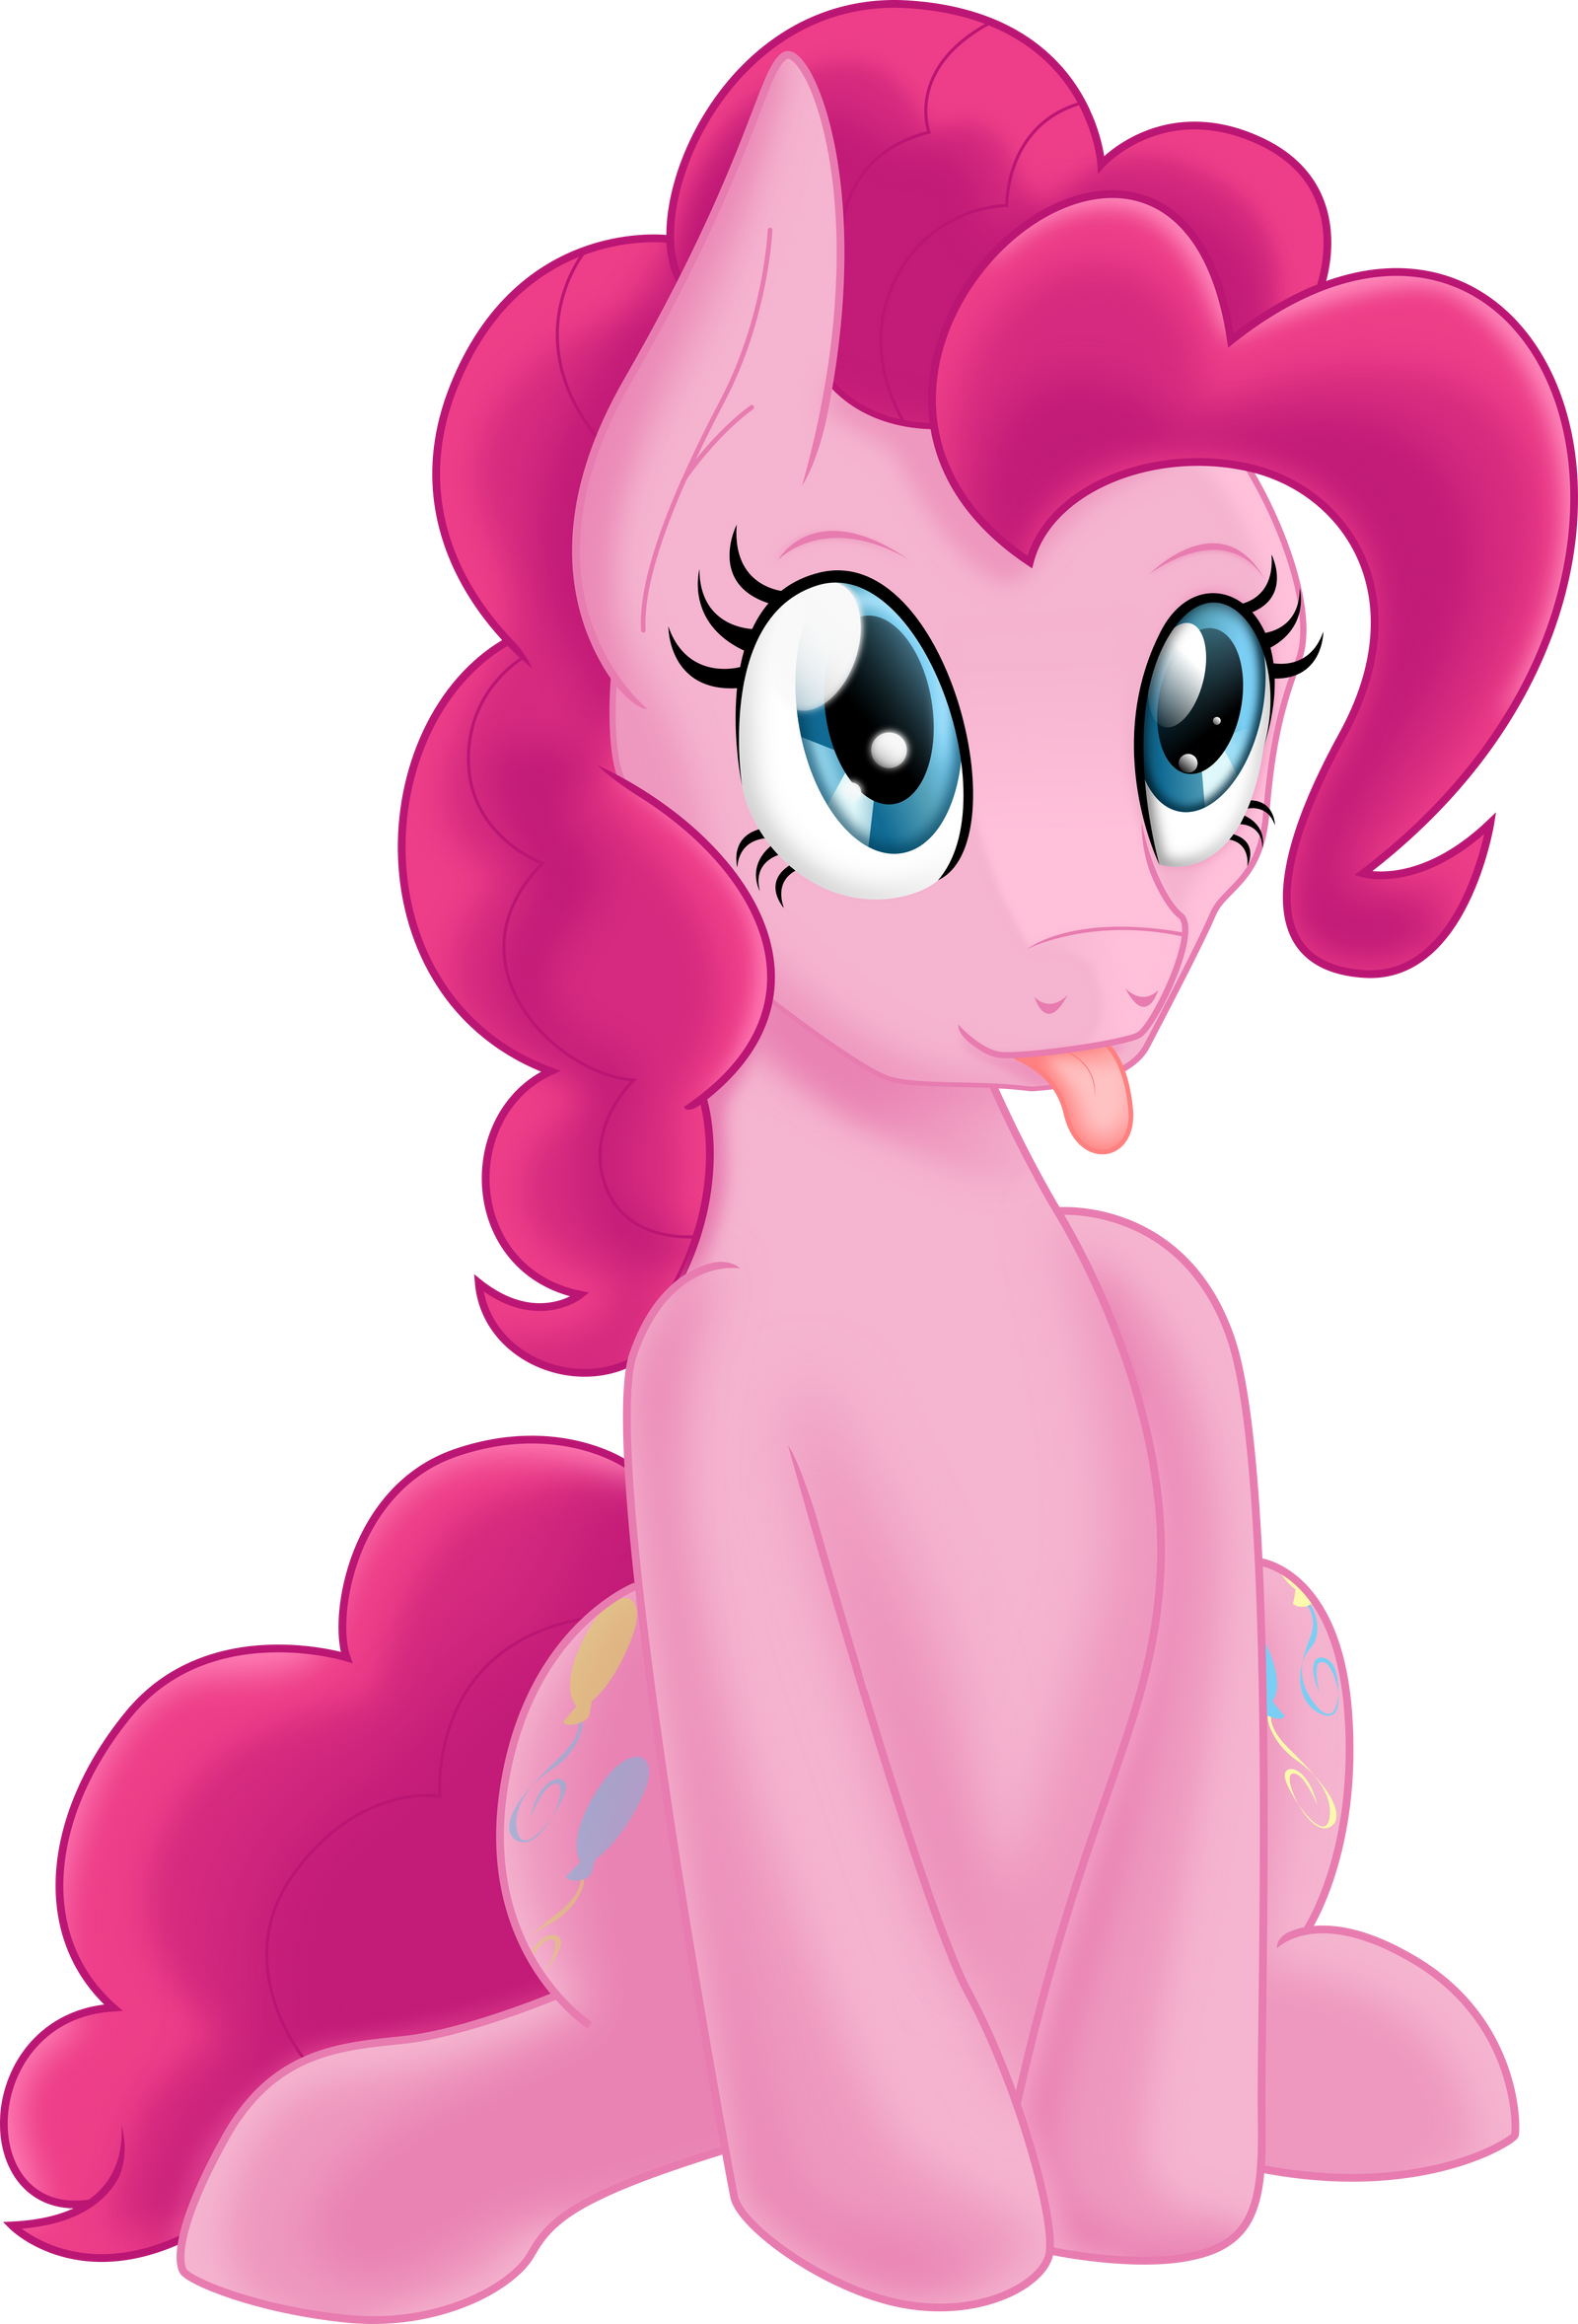 [Obrázek: pretty_pink_party_pony_posture_practice_...a7s66r.png]